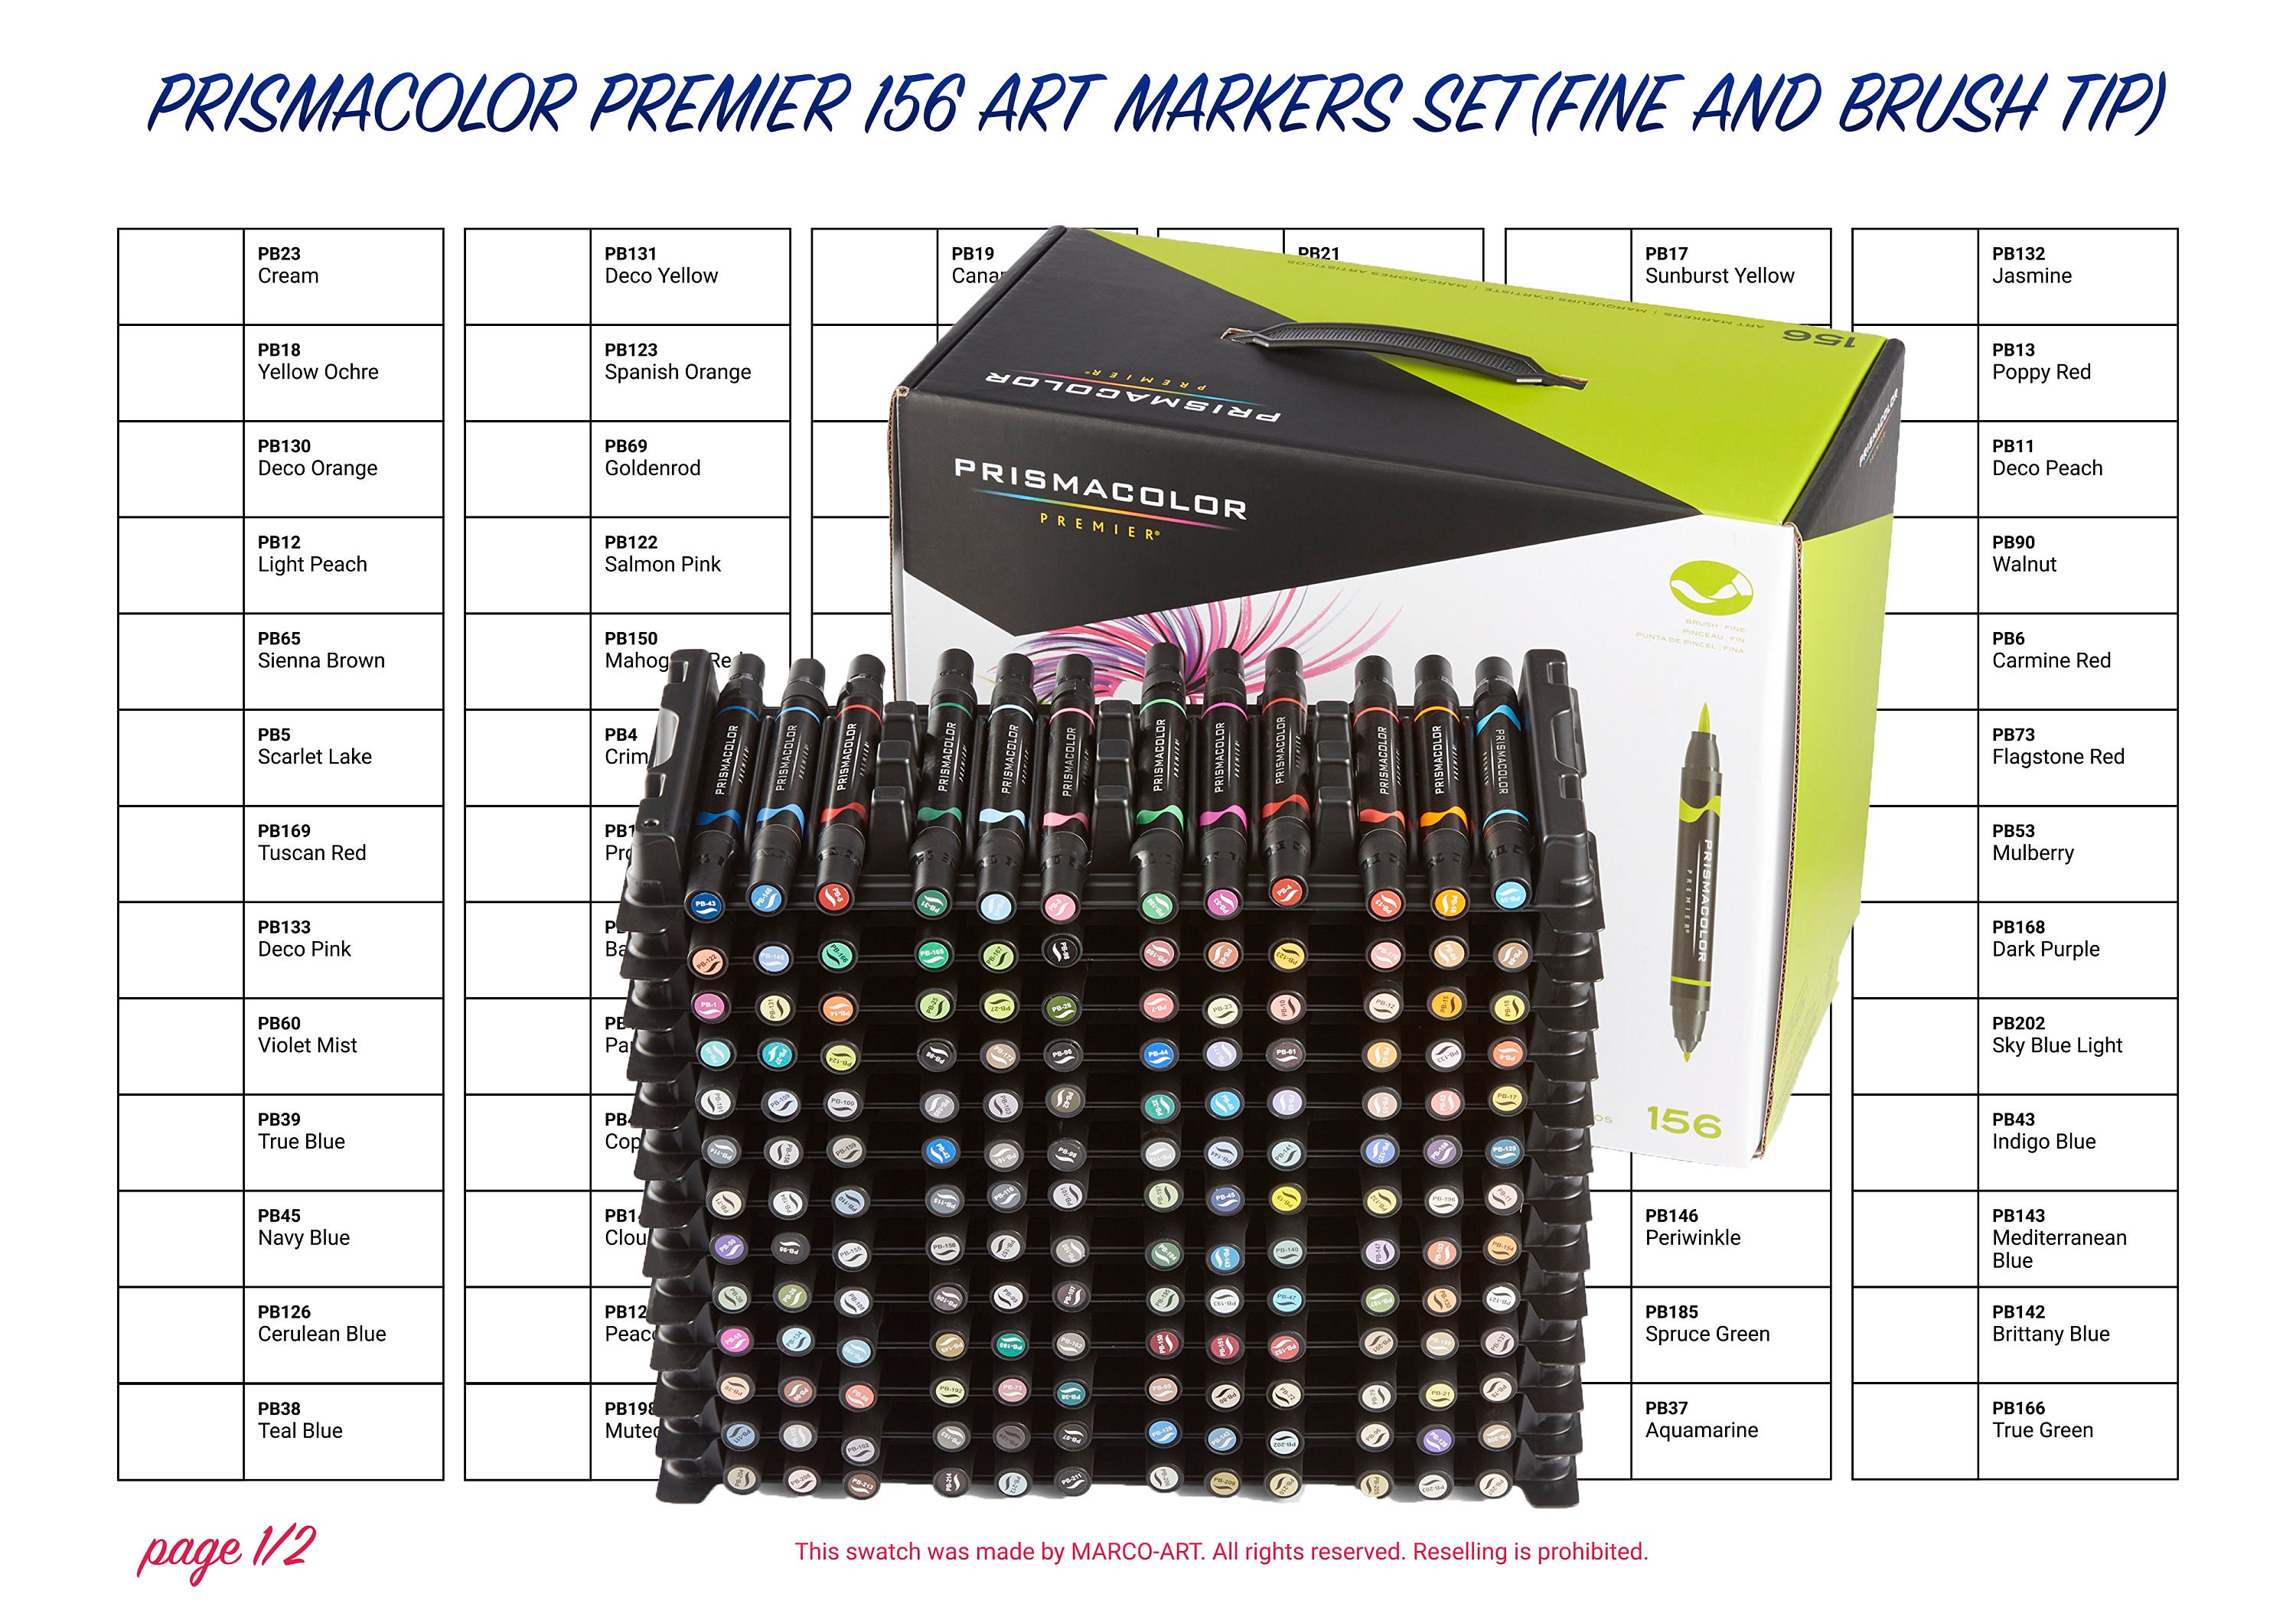  Arrtx Colored Pencils Set of 126 + 90 Colors Alcohol Markers  for Christmas Gift : Arts, Crafts & Sewing